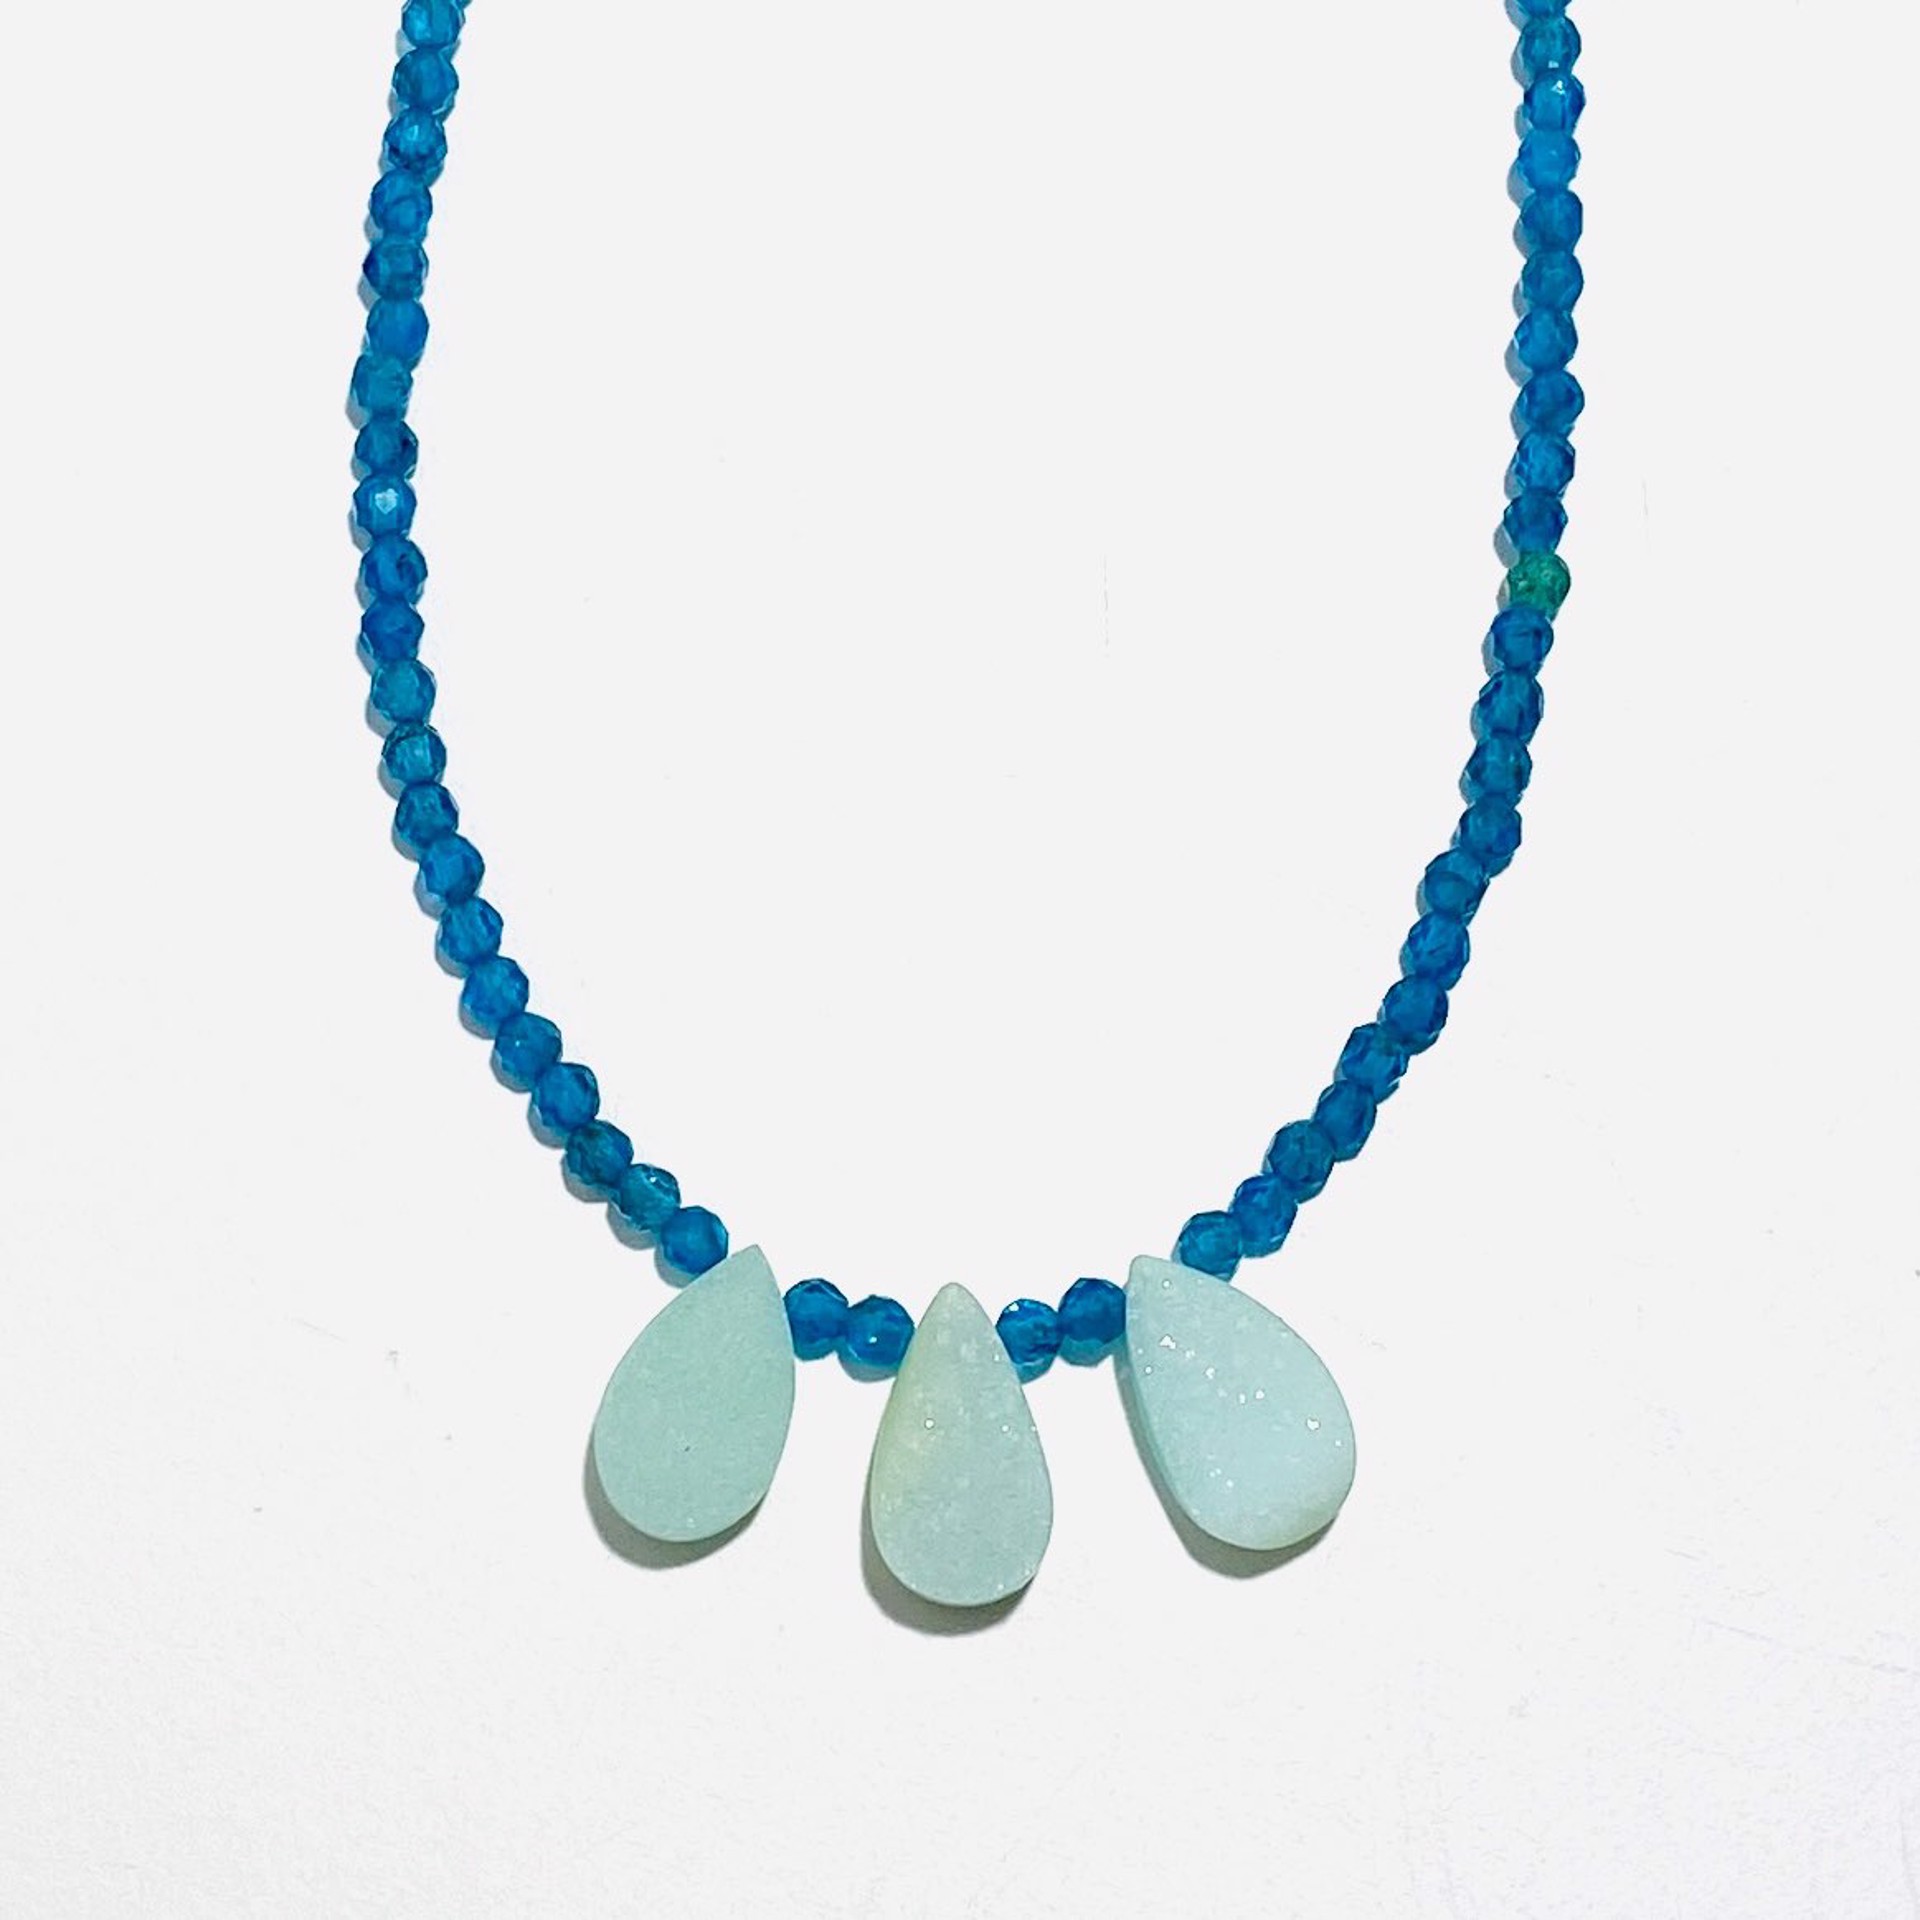 Faceted Tiny Neon Apatite Three Teardrop Druzy Focal Necklace by Nance Trueworthy